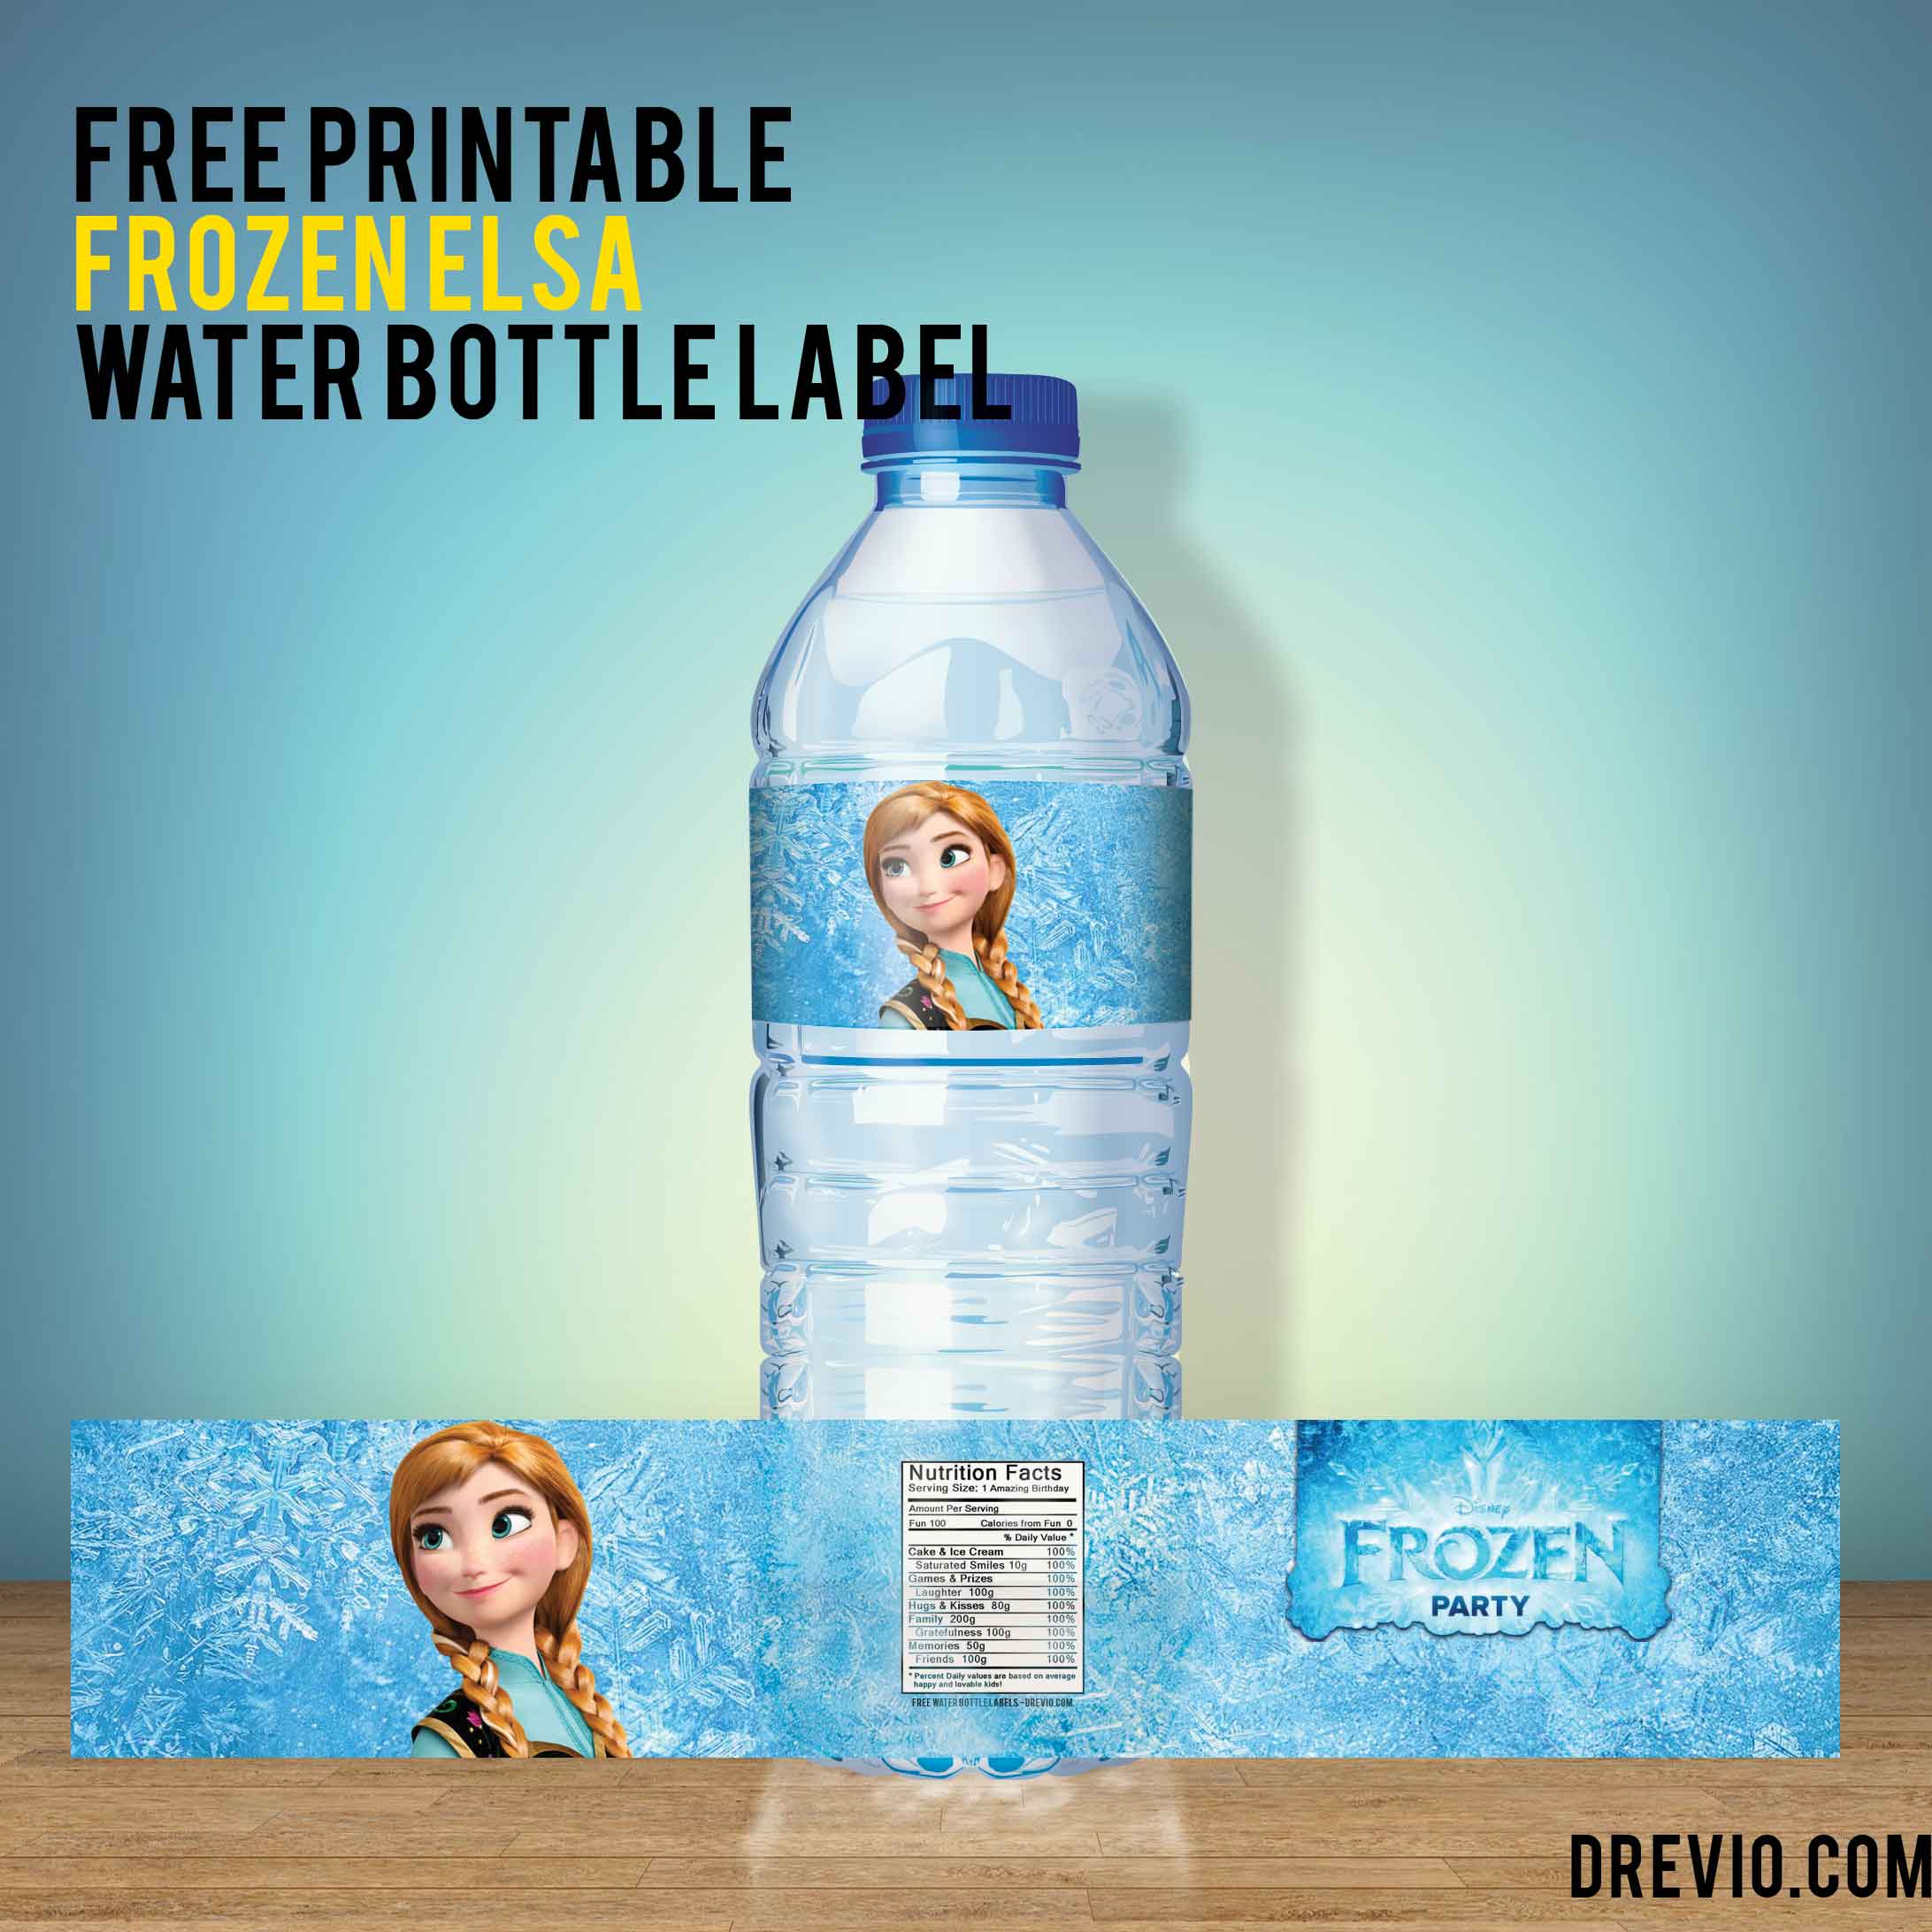 FREE Printable Frozen Water Bottle Labels  Download Hundreds FREE Throughout Free Printable Water Bottle Label Template